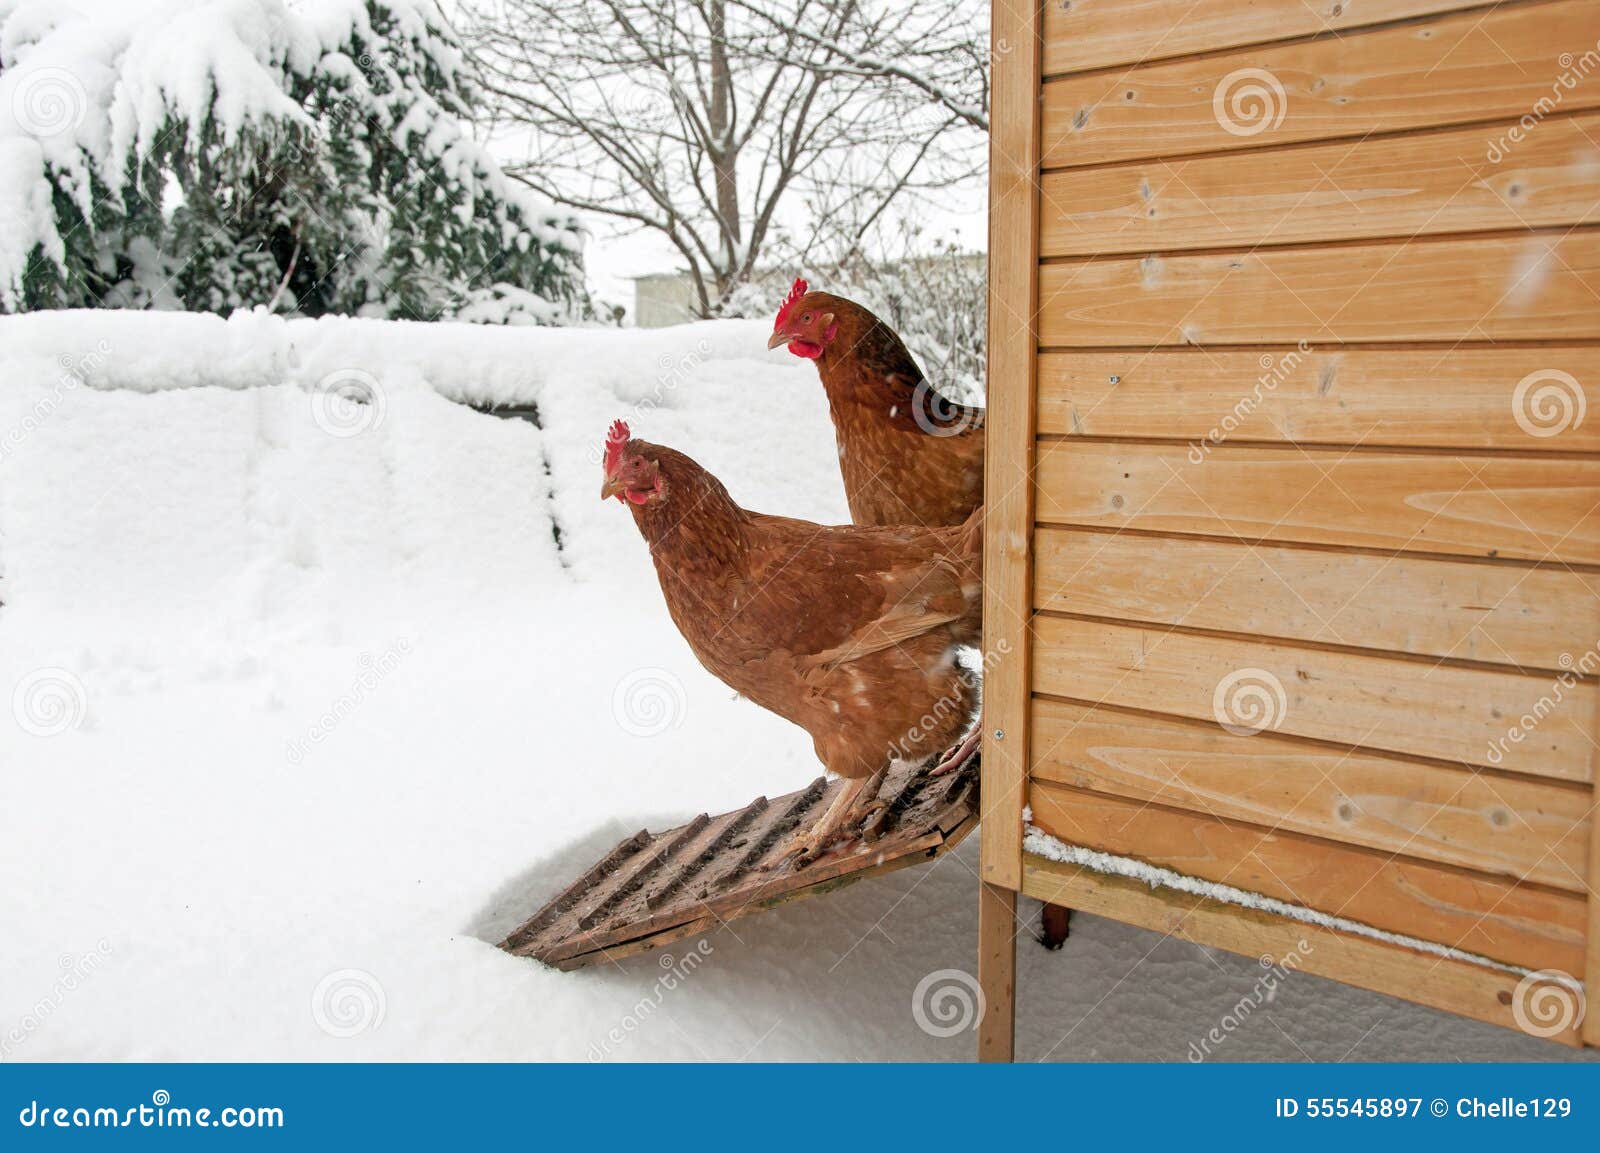 two hens staring at the snow